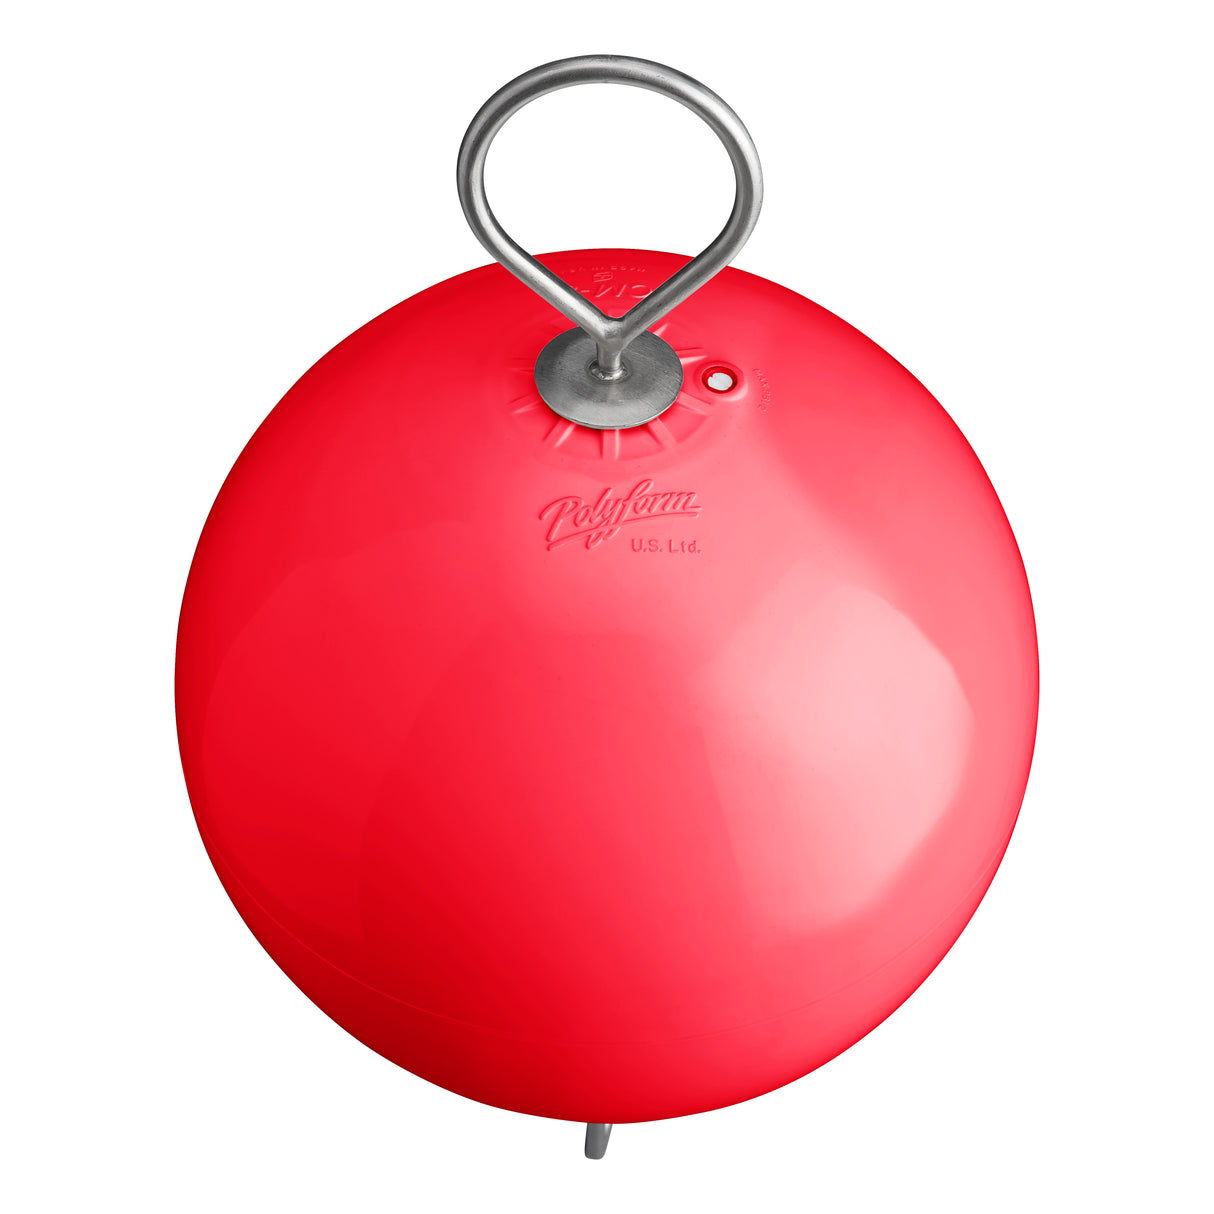 CM-3 Mooring Buoy with stainless steel mooring iron and shackle, red